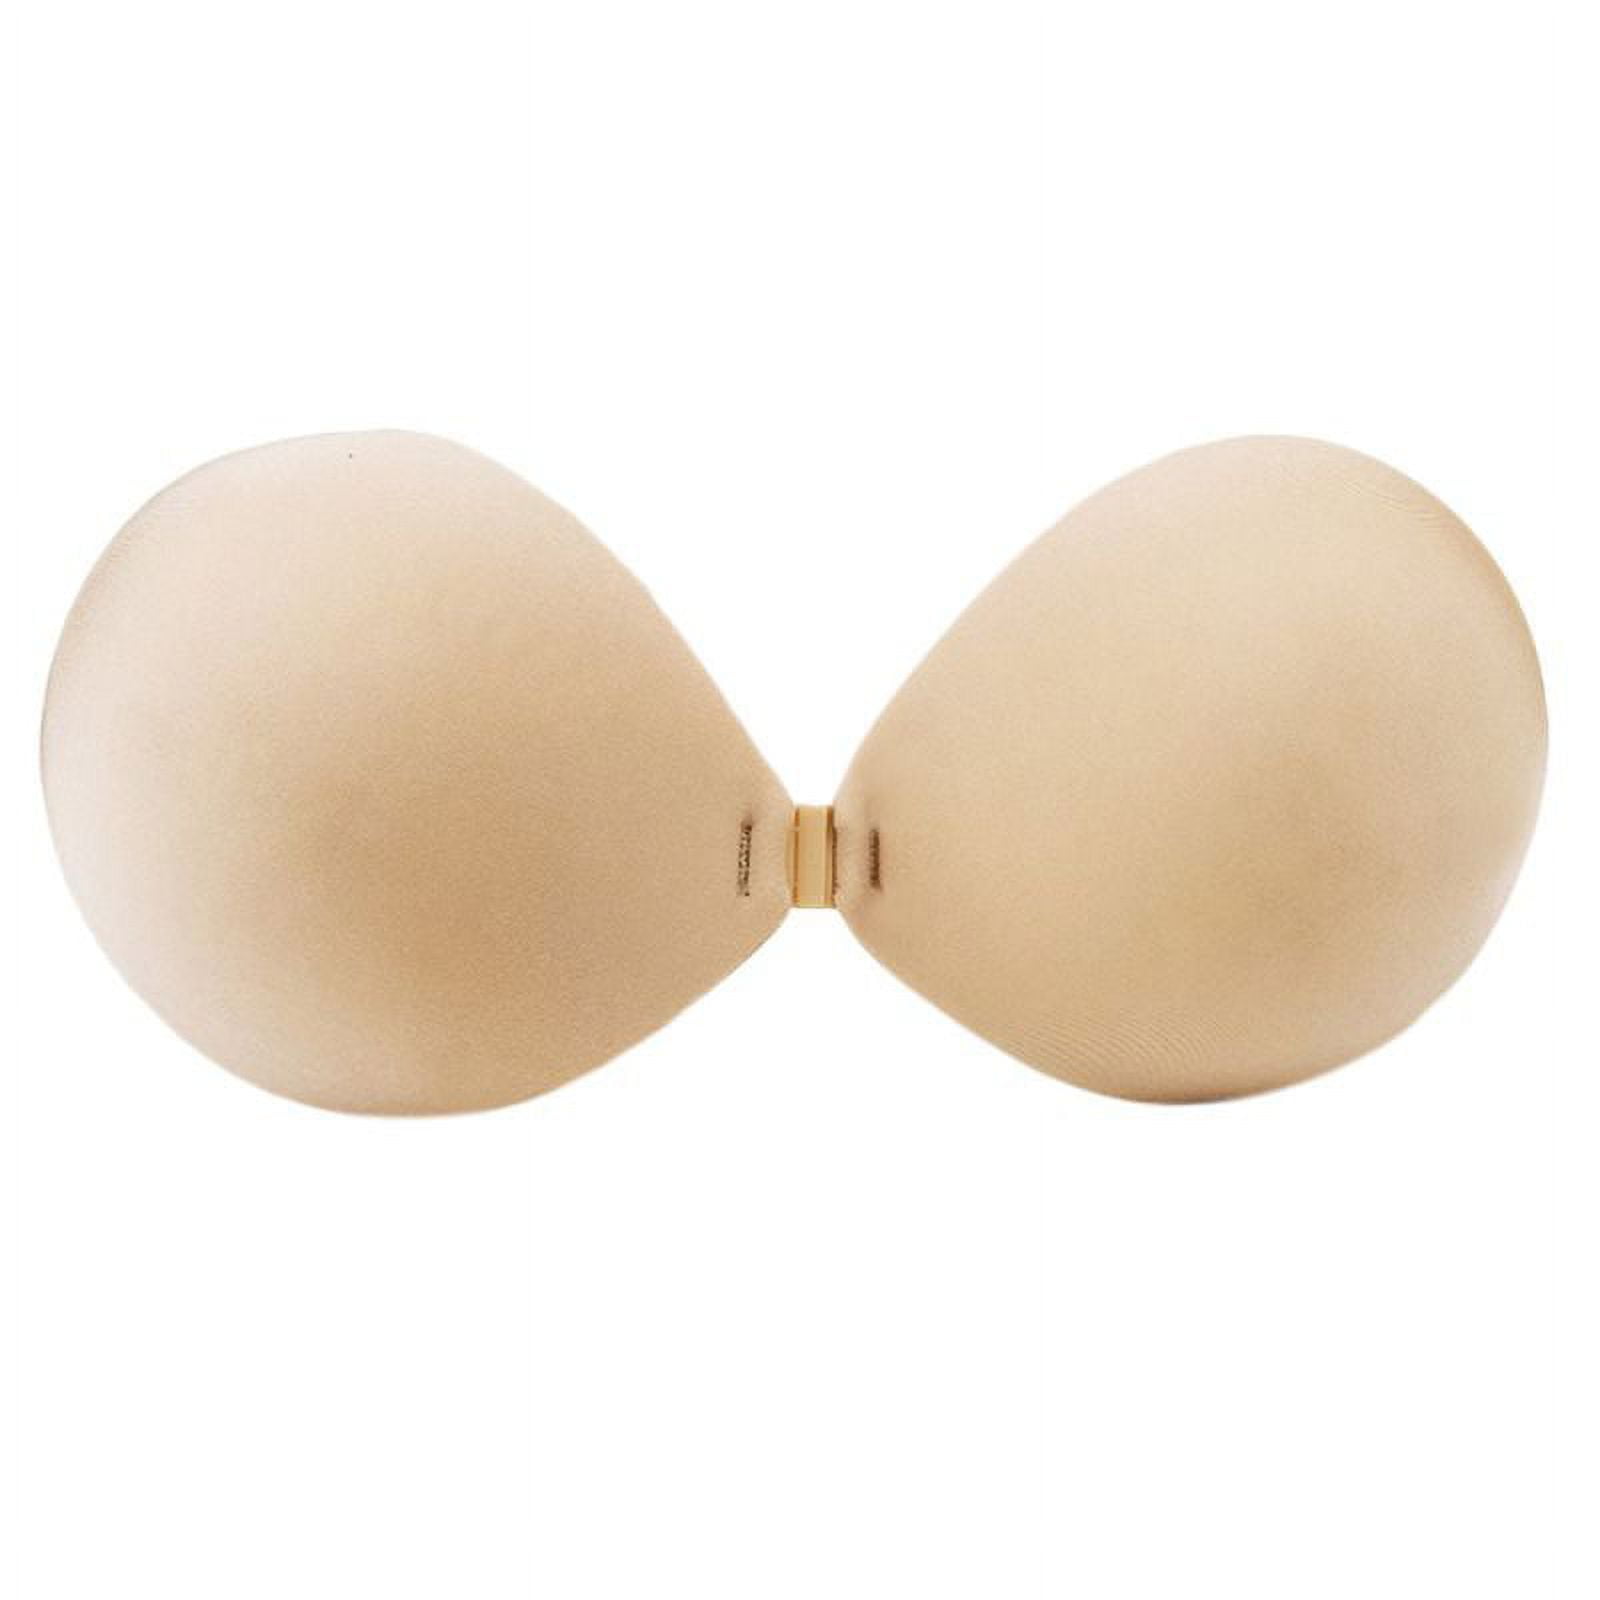 3 Pairs Adhesive Bra, Reusable Strapless Self Silicone Push Up Invisible  Sticky Nipple Covers For Women Beige-ksize 